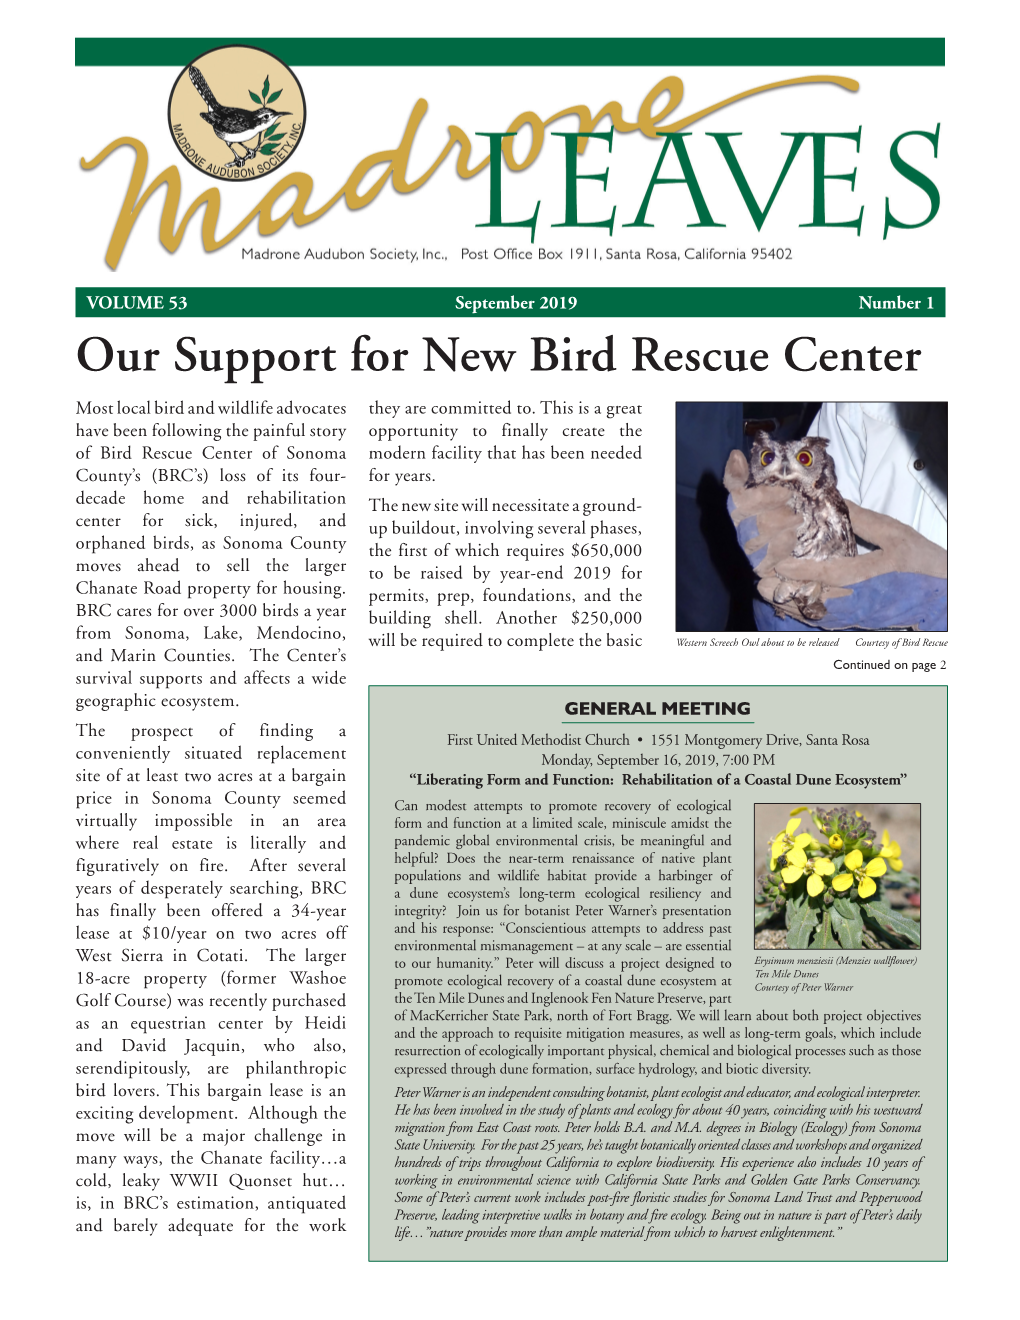 Our Support for New Bird Rescue Center Most Local Bird and Wildlife Advocates They Are Committed To